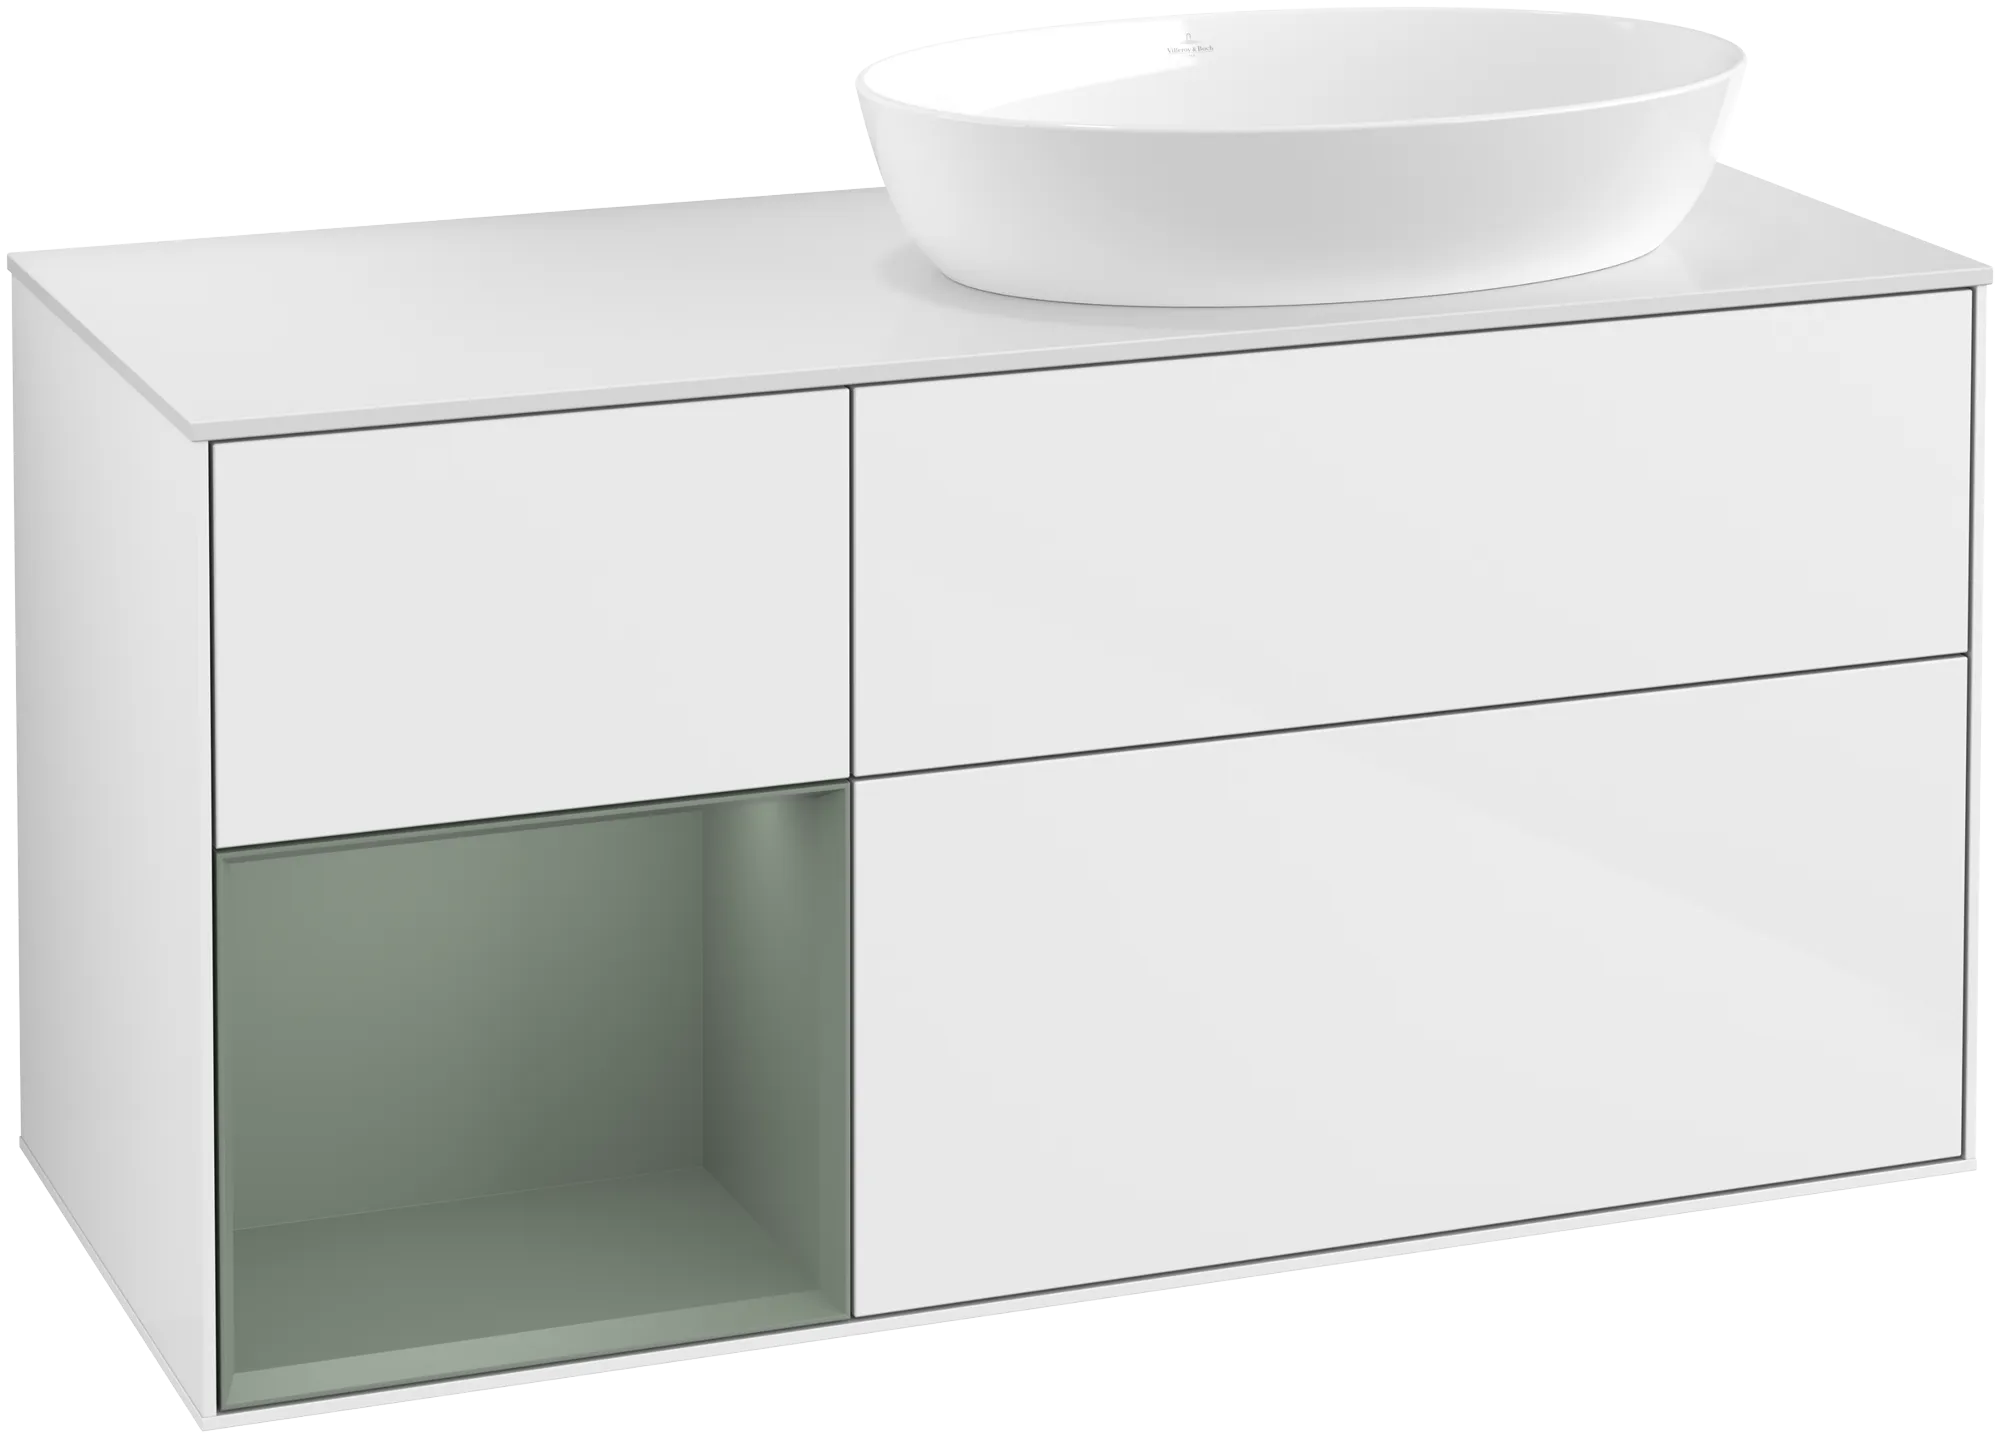 Picture of VILLEROY BOCH Finion Vanity unit, with lighting, 3 pull-out compartments, 1200 x 603 x 501 mm, Glossy White Lacquer / Olive Matt Lacquer / Glass White Matt #GA41GMGF